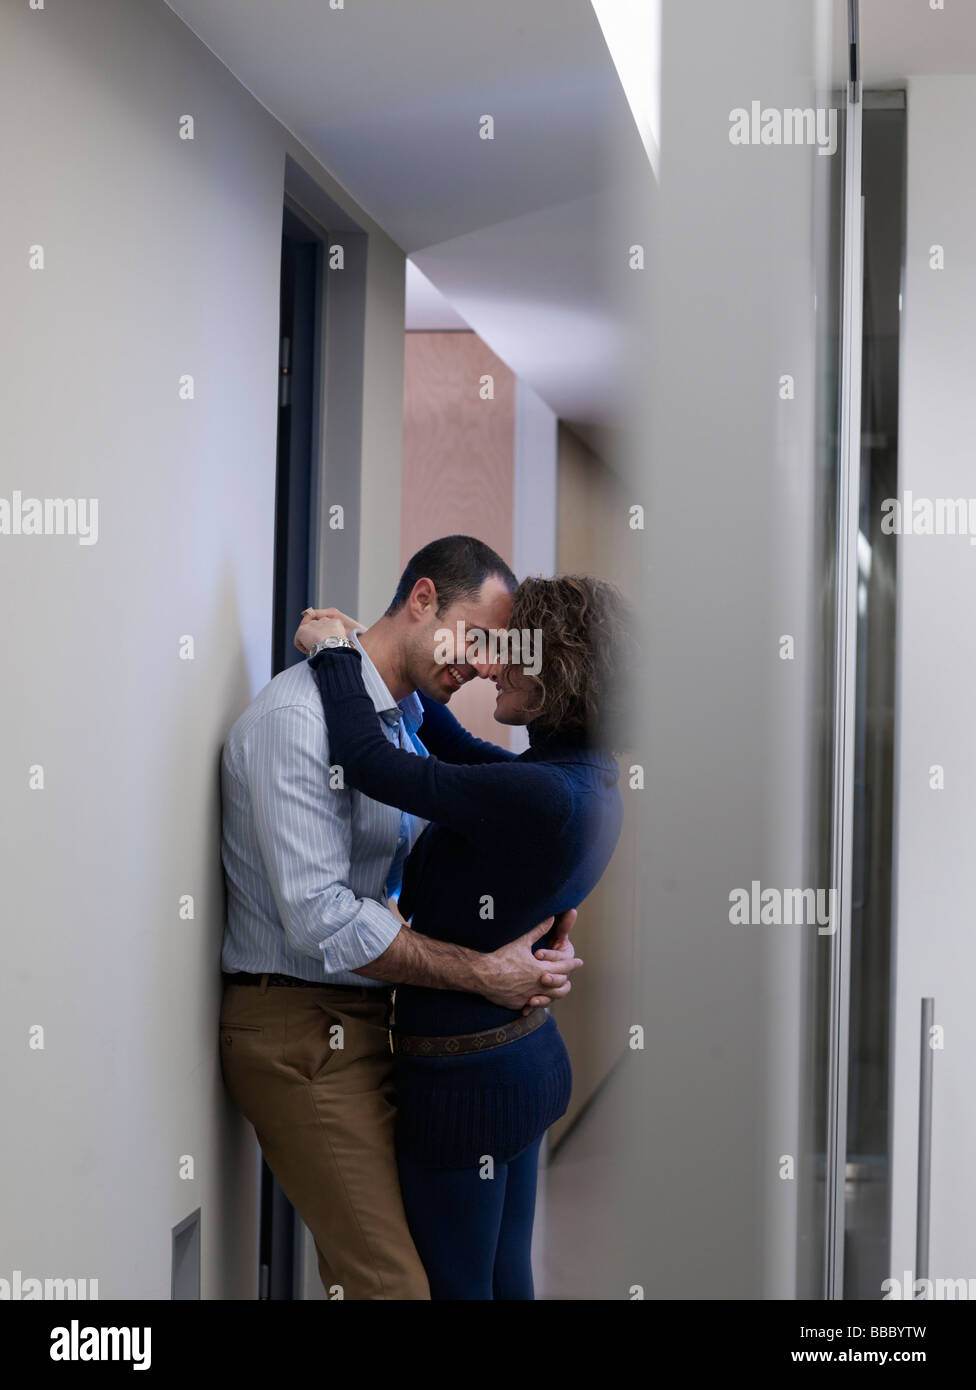 Couple kissing in an office corridor Stock Photo